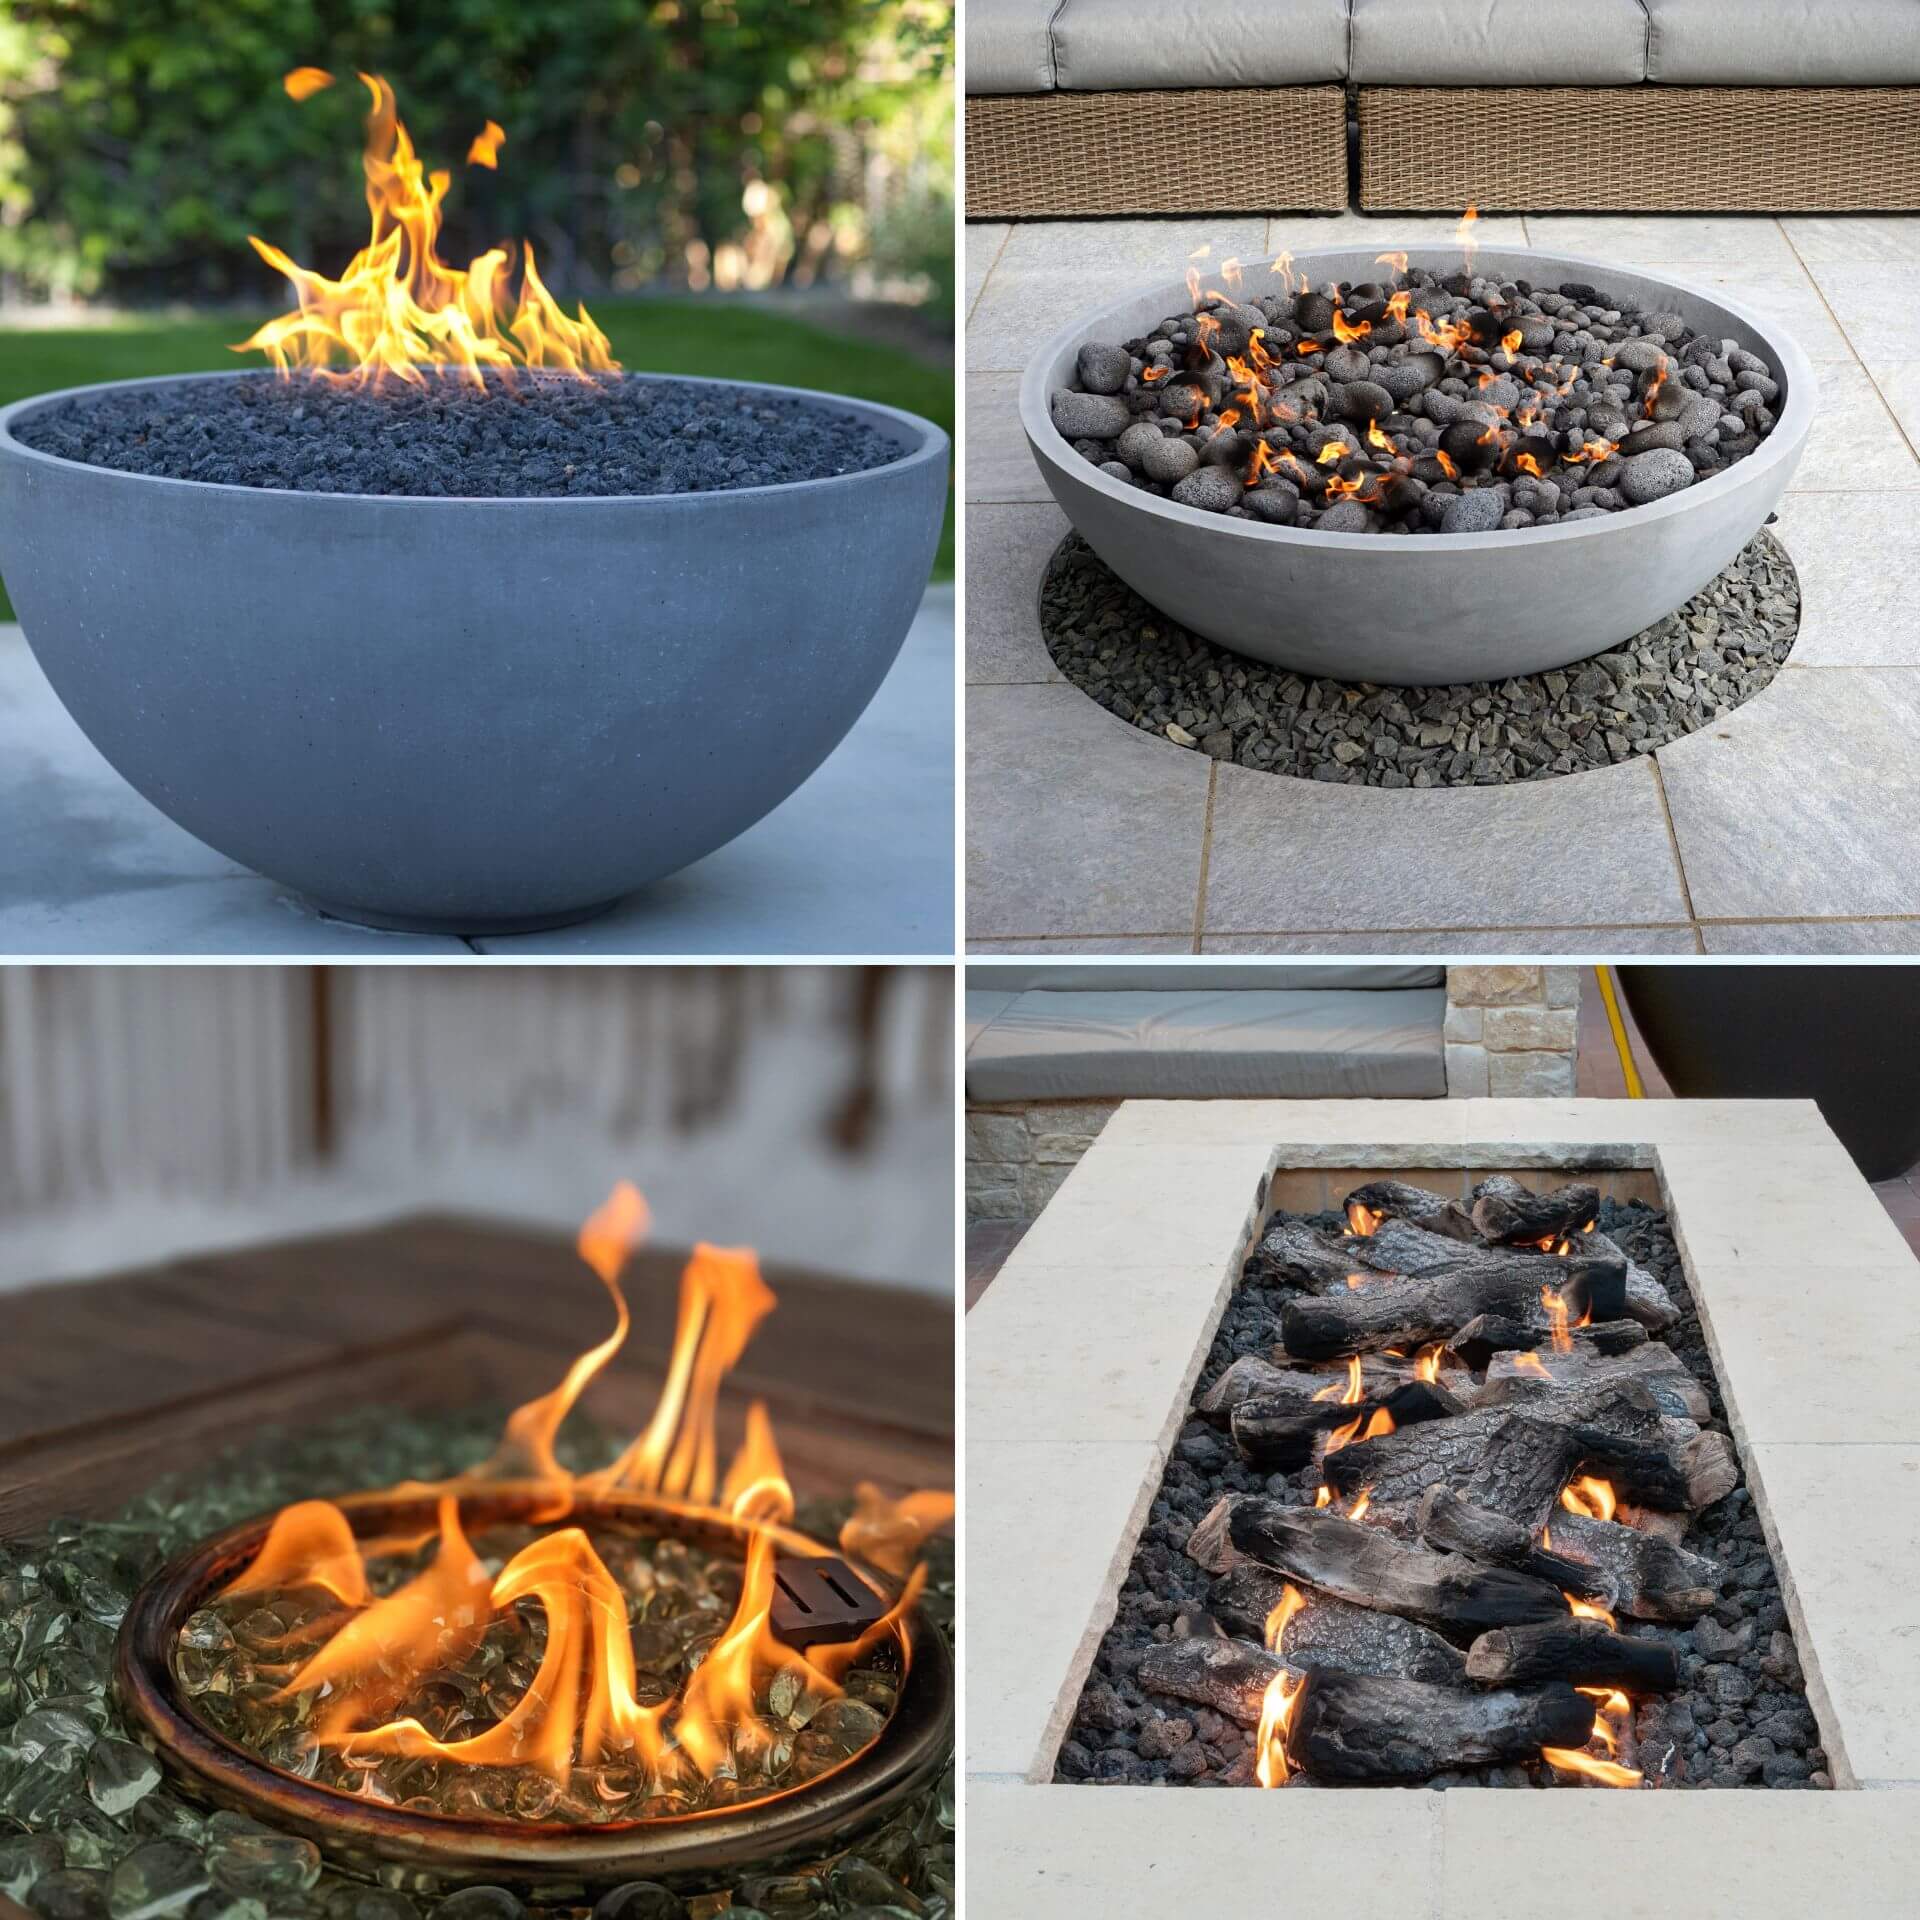 4 fire pits either propane or natural gas